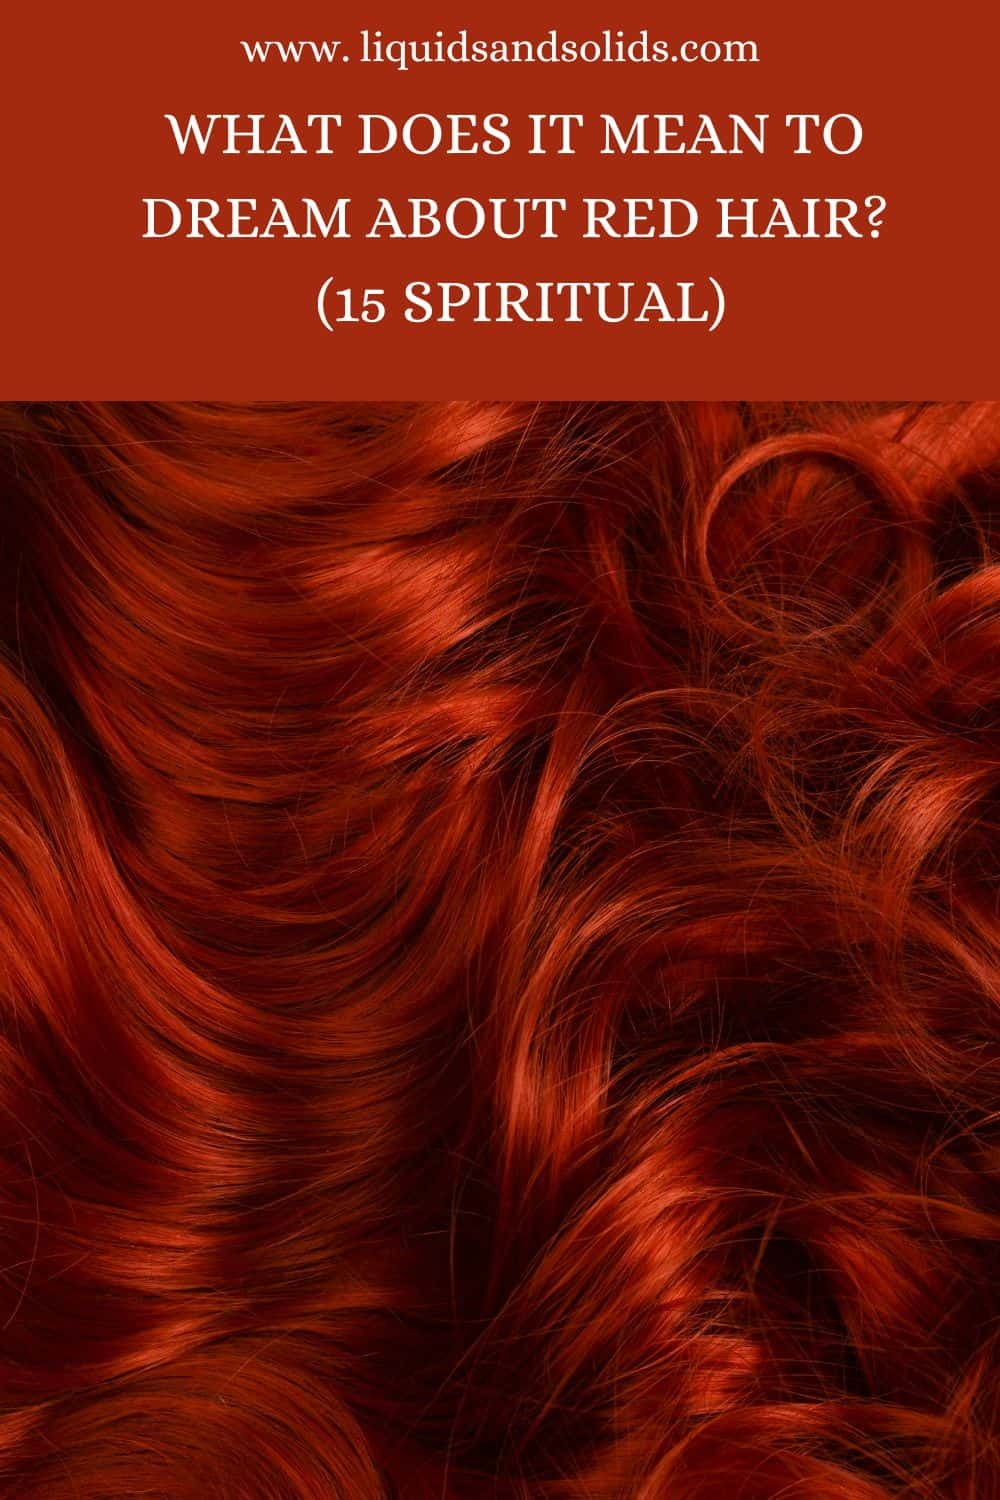 What Does It Mean To Dream About Red Hair? (15 Spiritual)